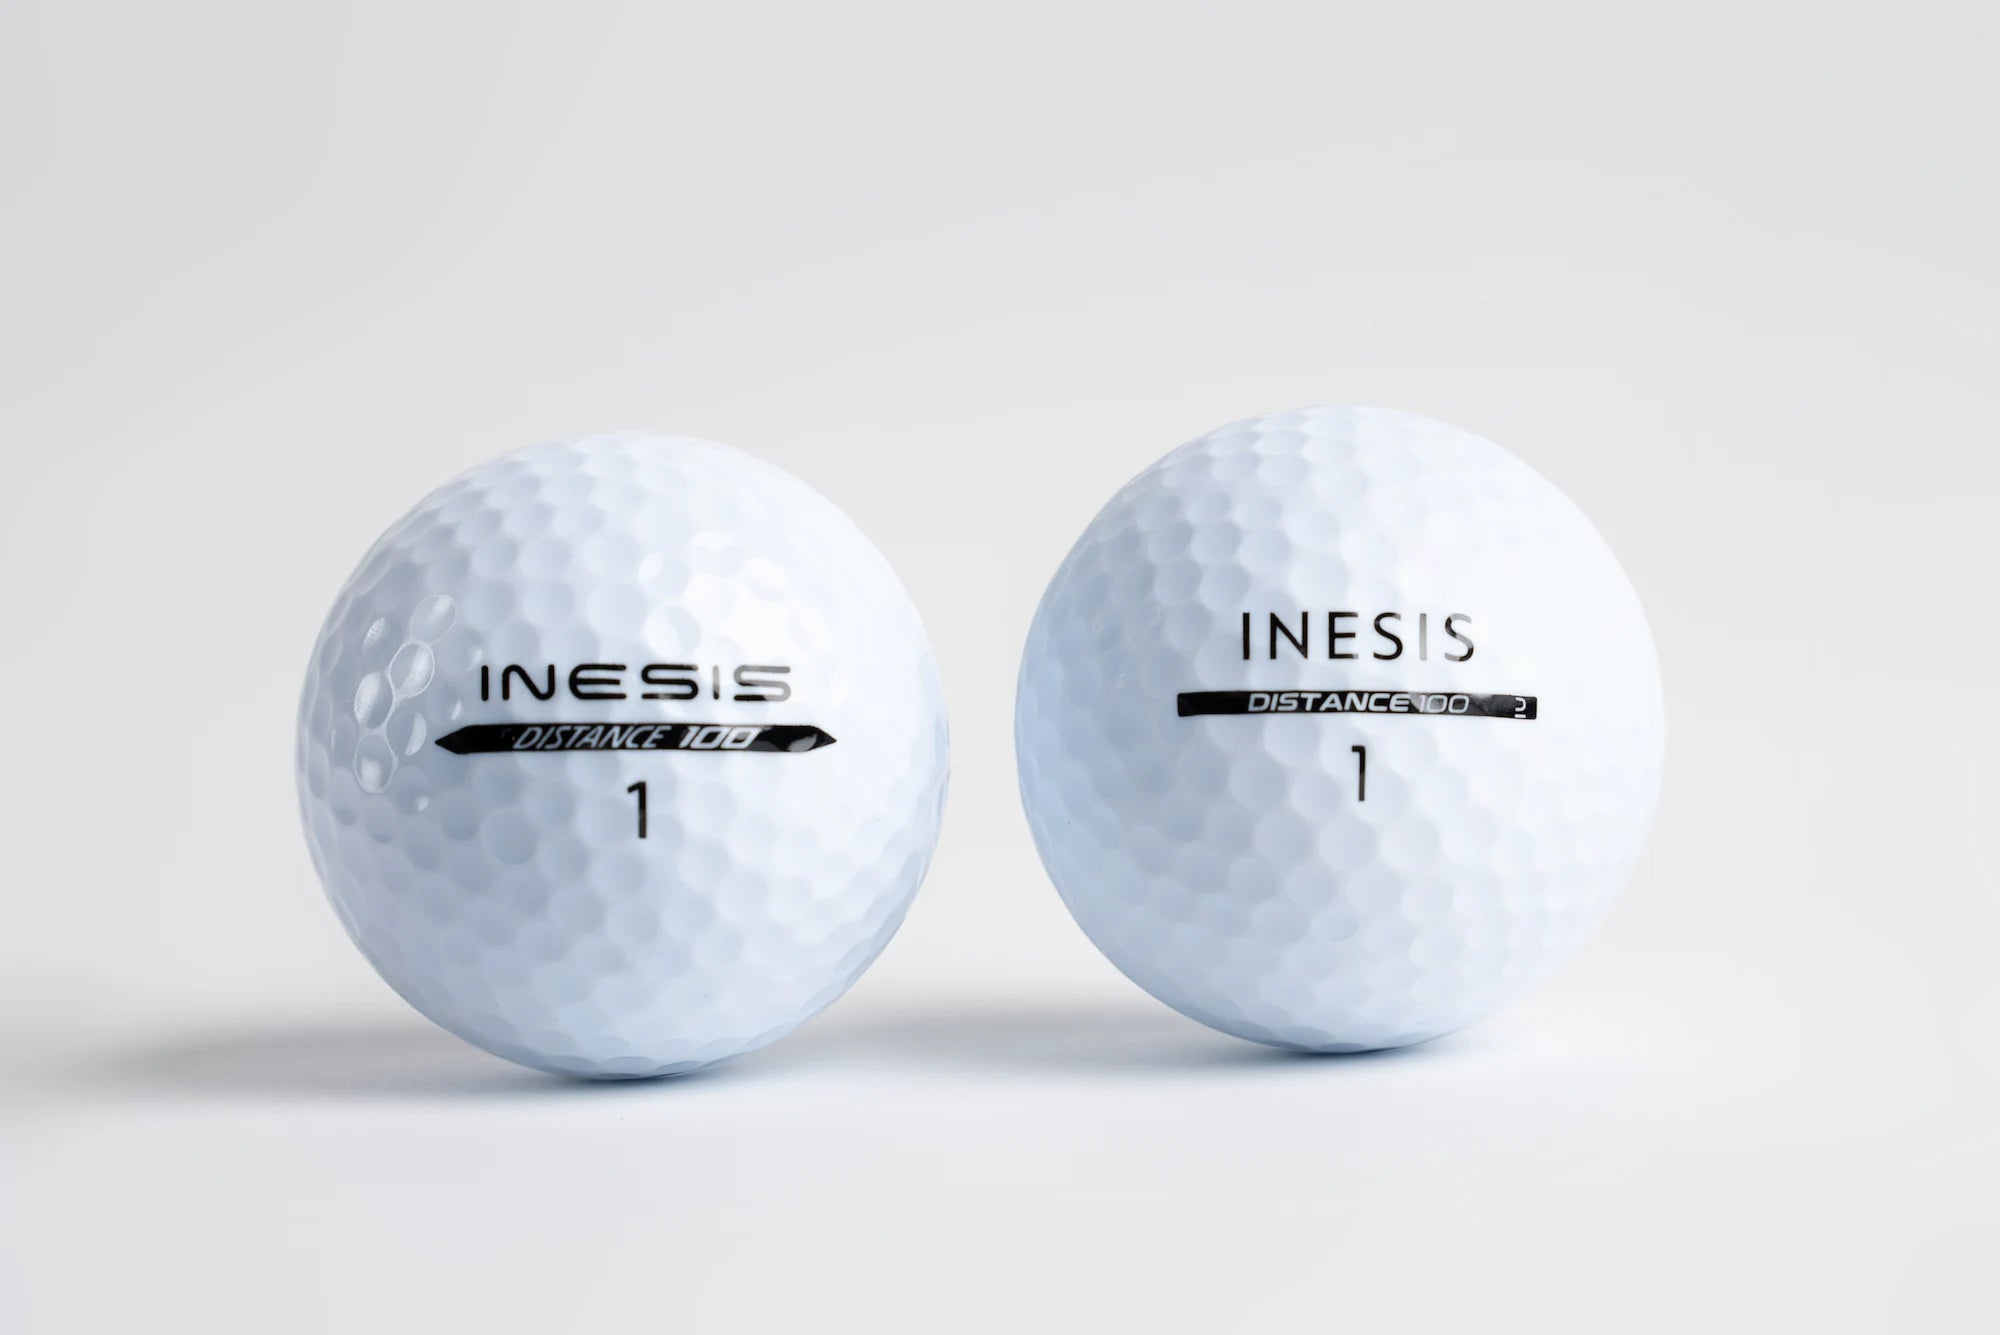 Inesis Distance100 Golf Balls: More Sustainable Design